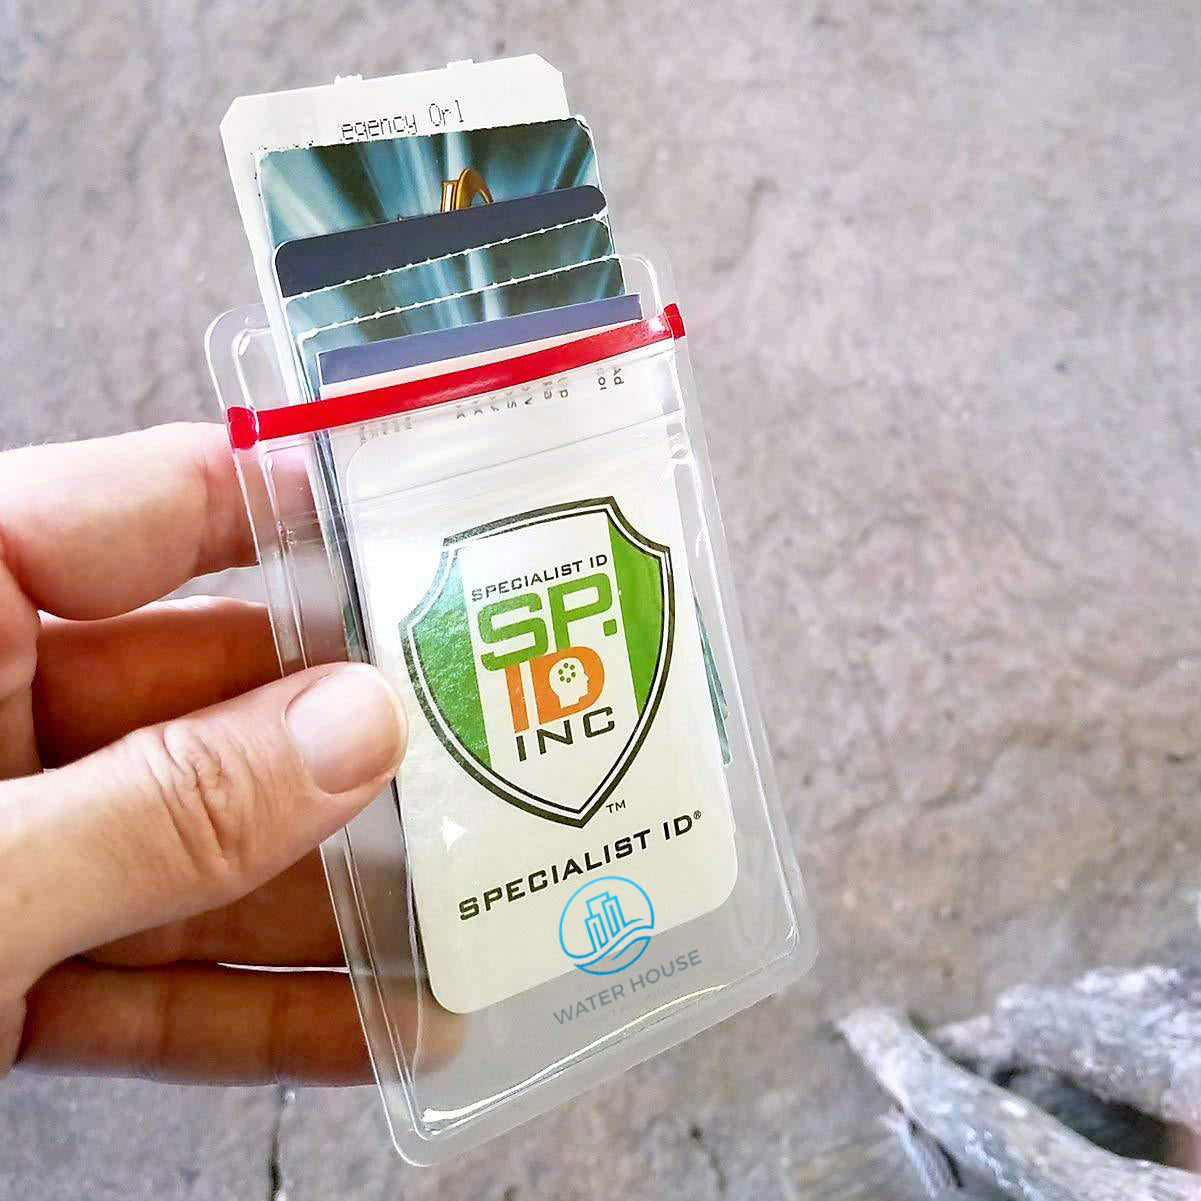 A hand holds a transparent cardholder, showcasing Custom Heavy Duty Vinyl Vertical Badge Holder w/ Resealable Zip Top (1815-1110) that includes an ID card labeled "Specialist ID SF Inc" with a shield emblem and another card partially visible behind it.